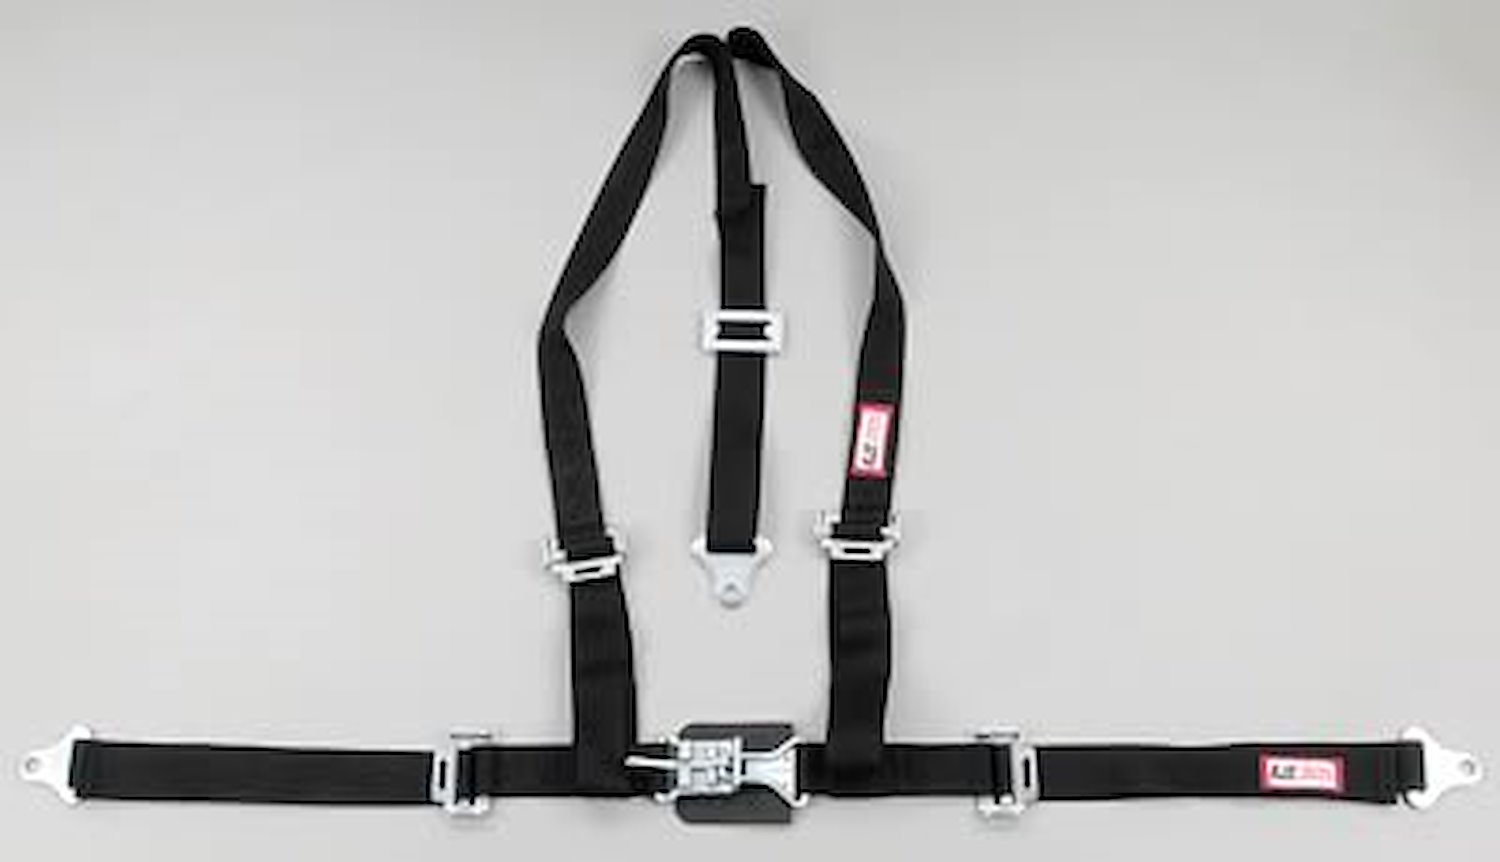 NON-SFI L&L HARNESS 3 PULL DOWN Lap Belt SEWN IN 2 Shoulder Harness V ROLL BAR Mount w/STERNUM STRAP ALL WRAP ENDS YELLOW